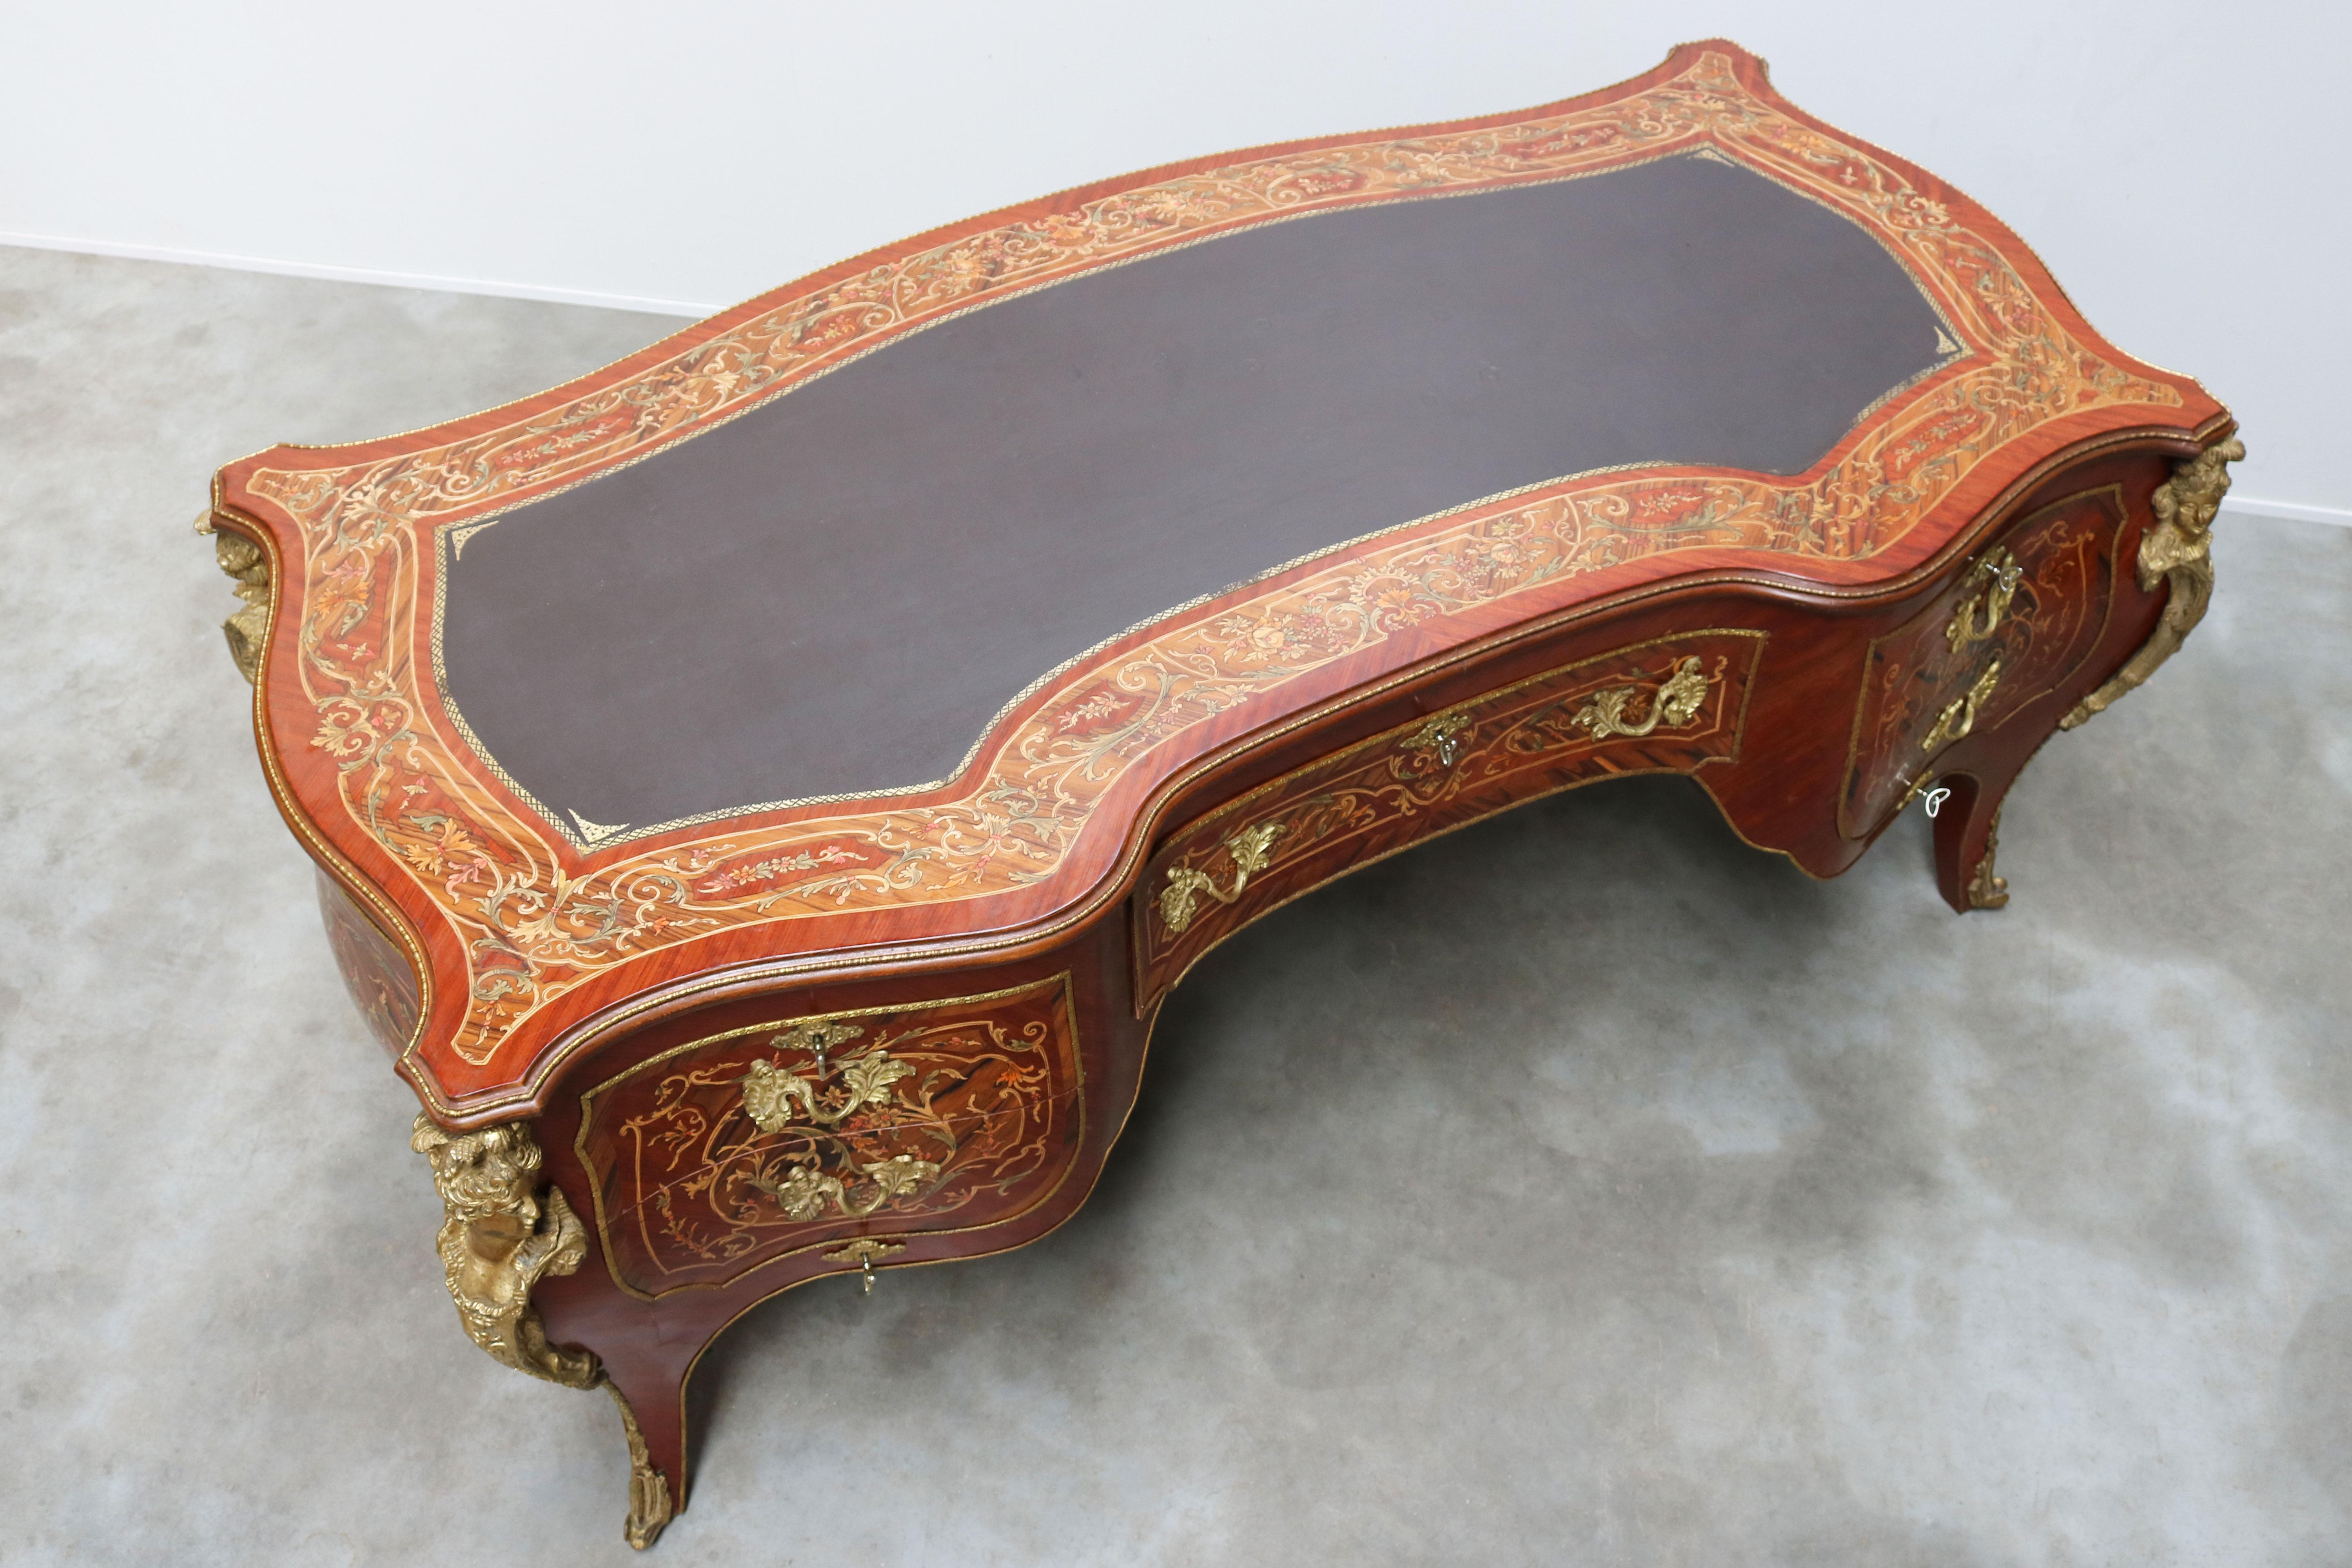 Rounded Italian Executive Desk in Louis XV Style Marquetry Bronze 1950 Inlaid For Sale 5